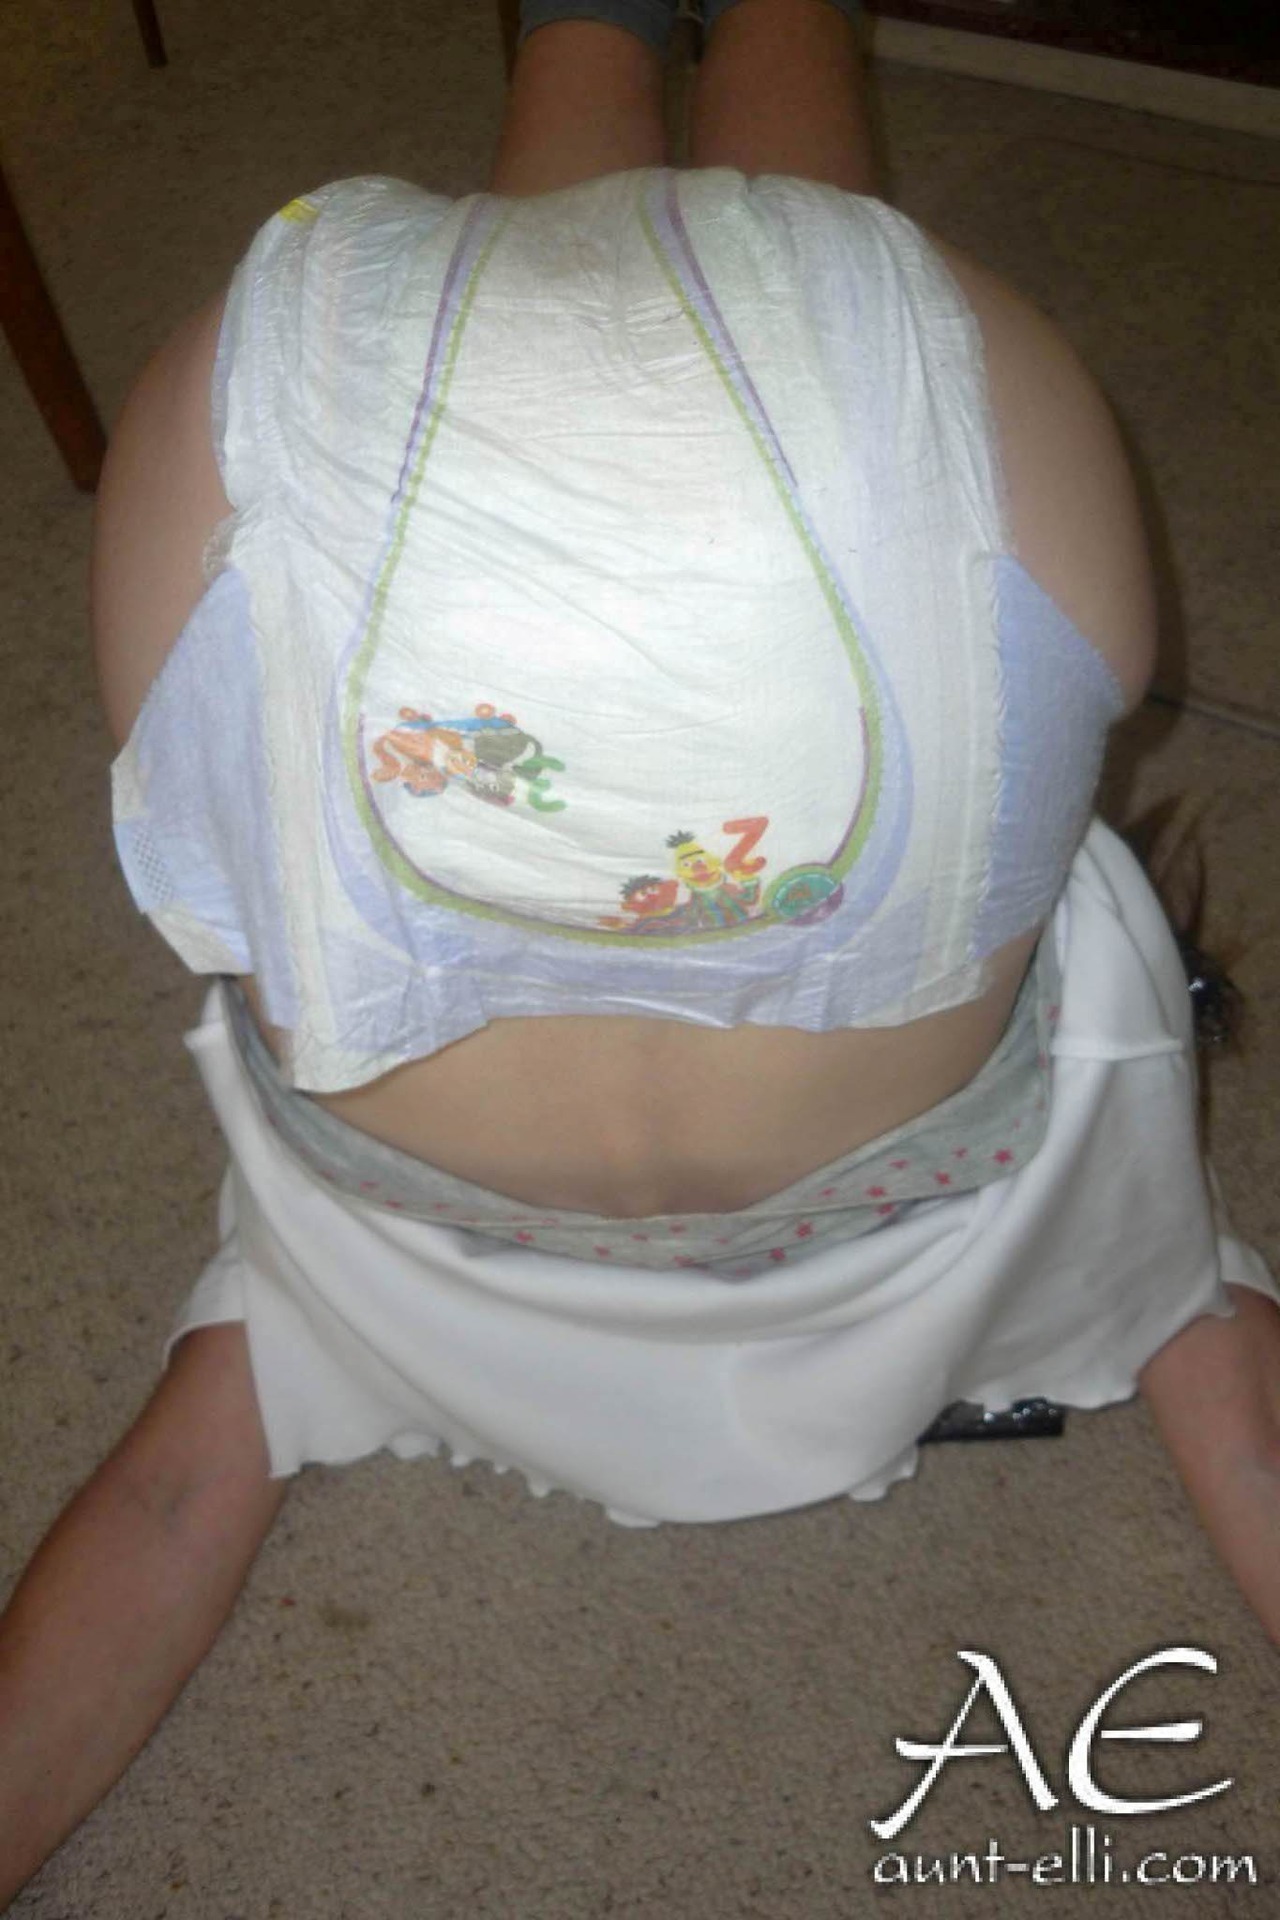 Girls pissing their diapers videoas